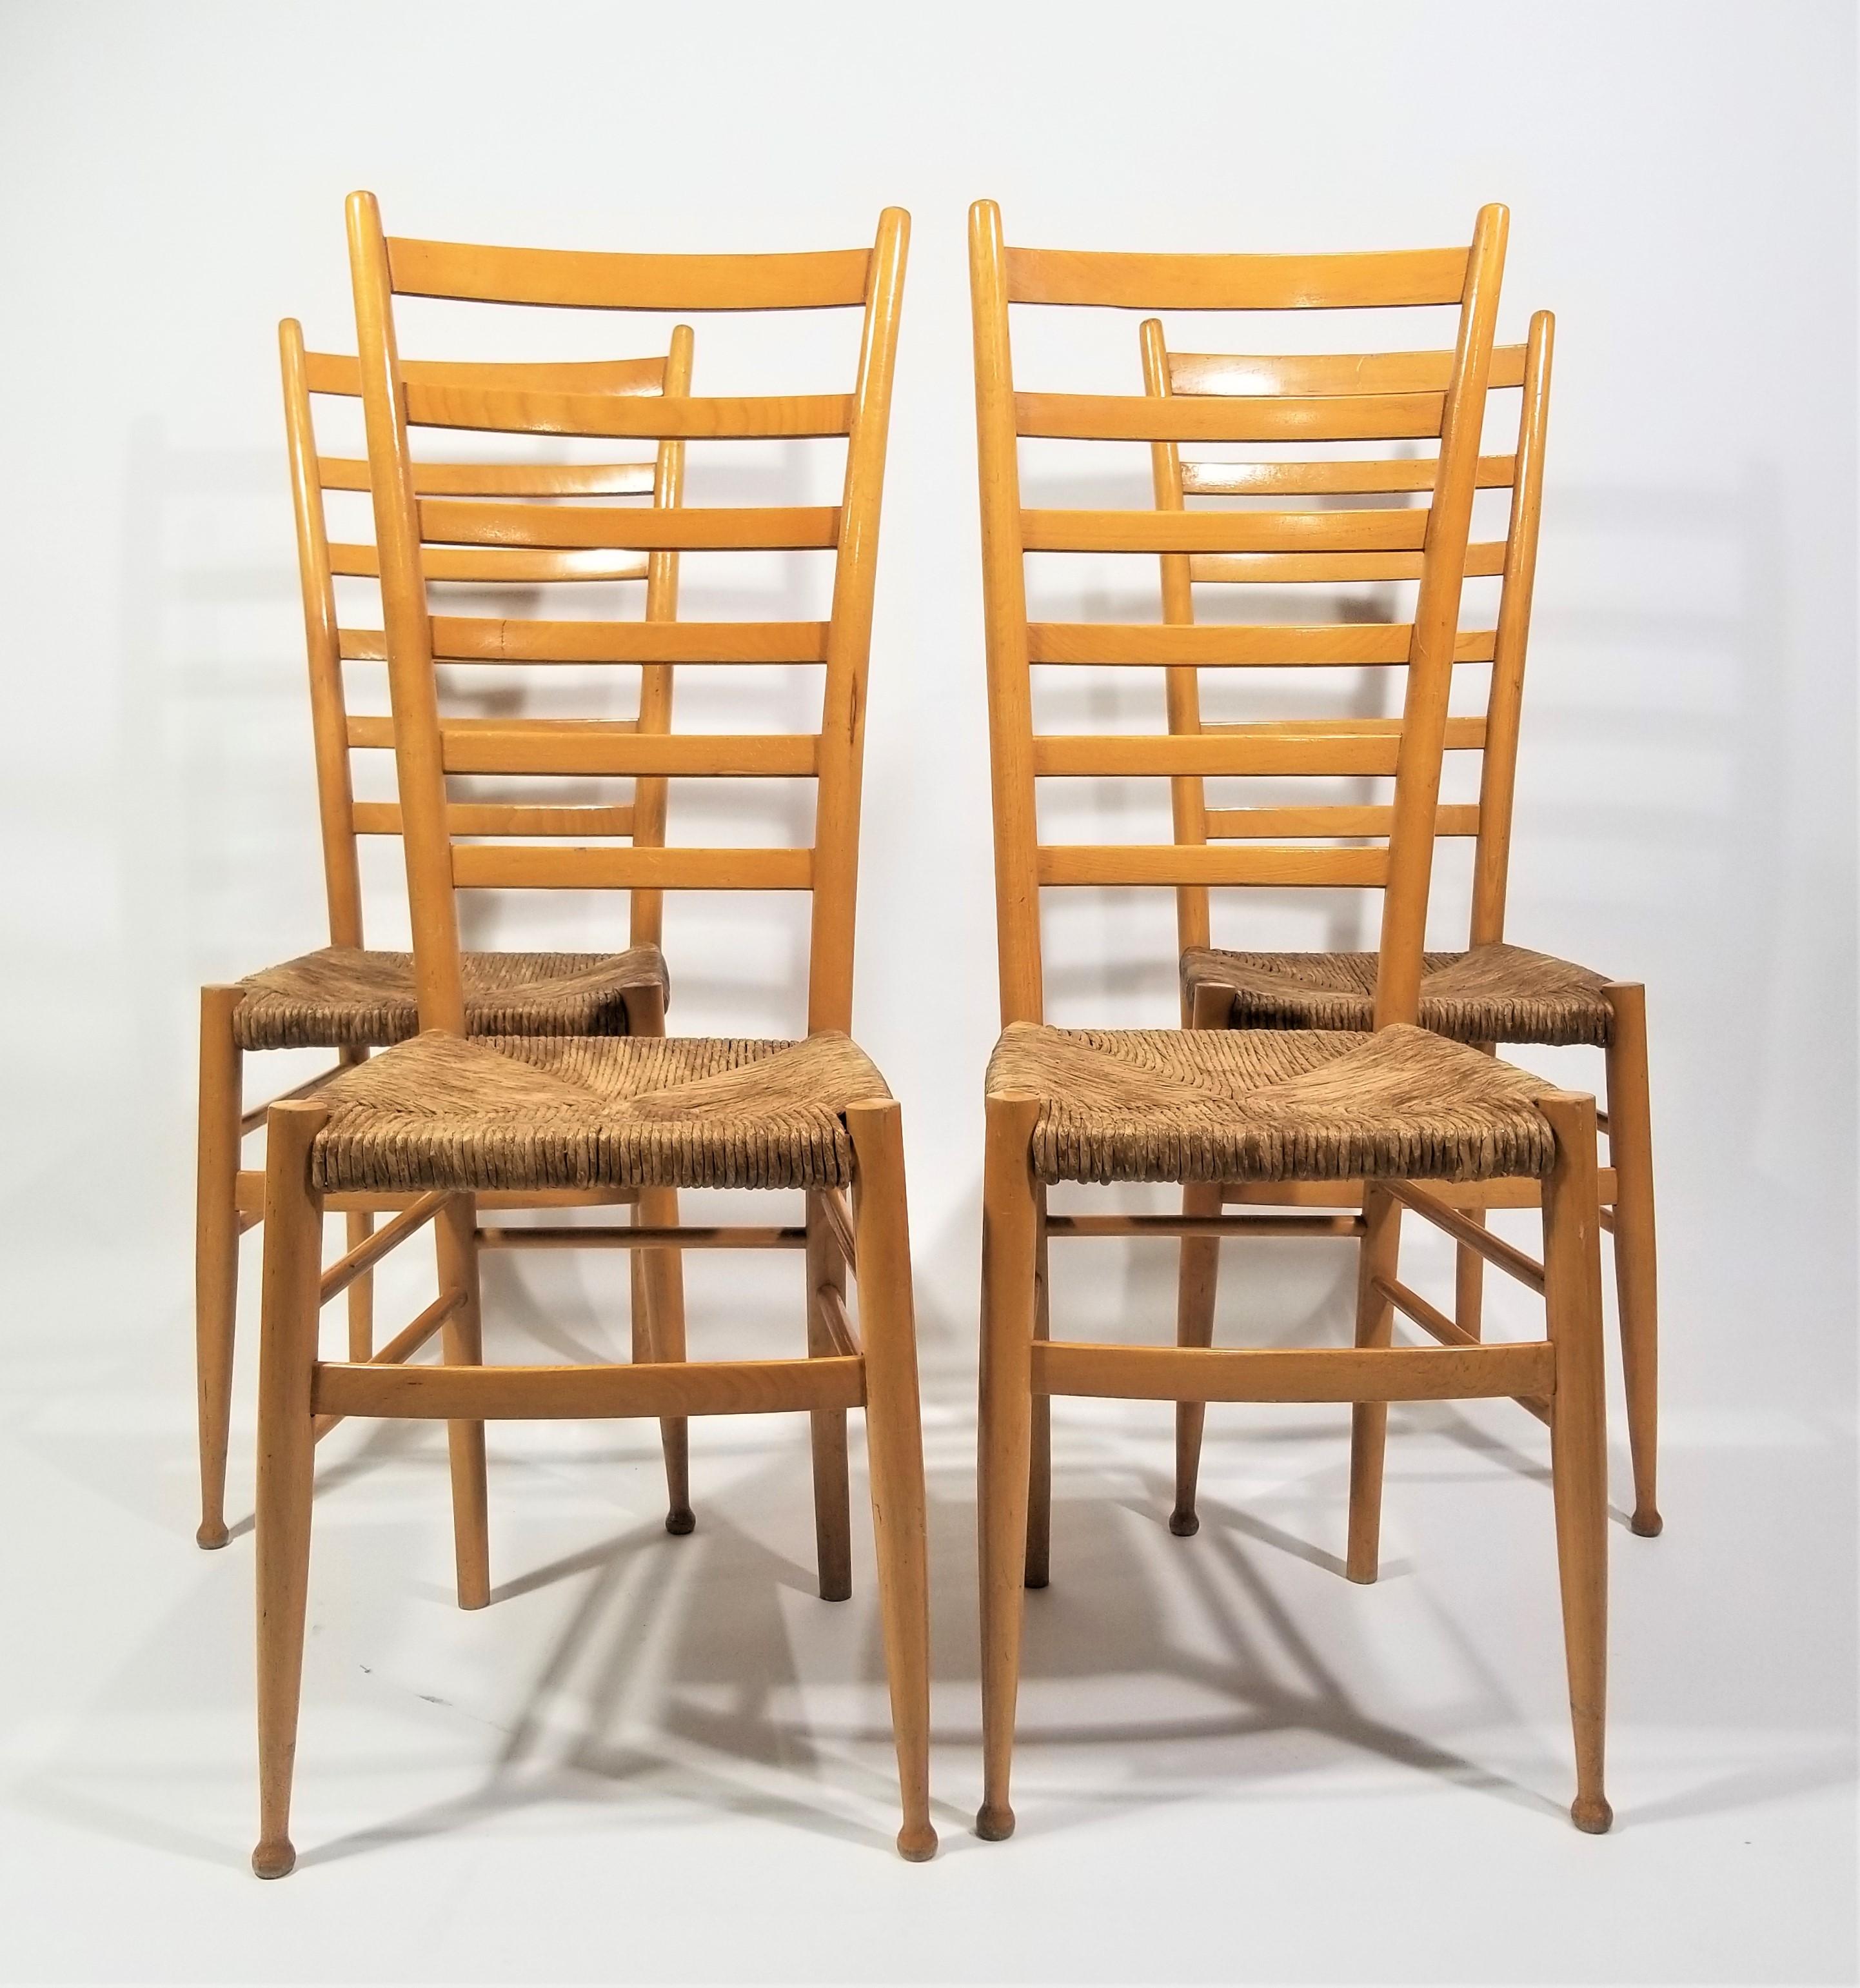 20th Century Italian Gio  Ponti Style Tall Ladder Back Chairs 1970s Made in Italy  For Sale